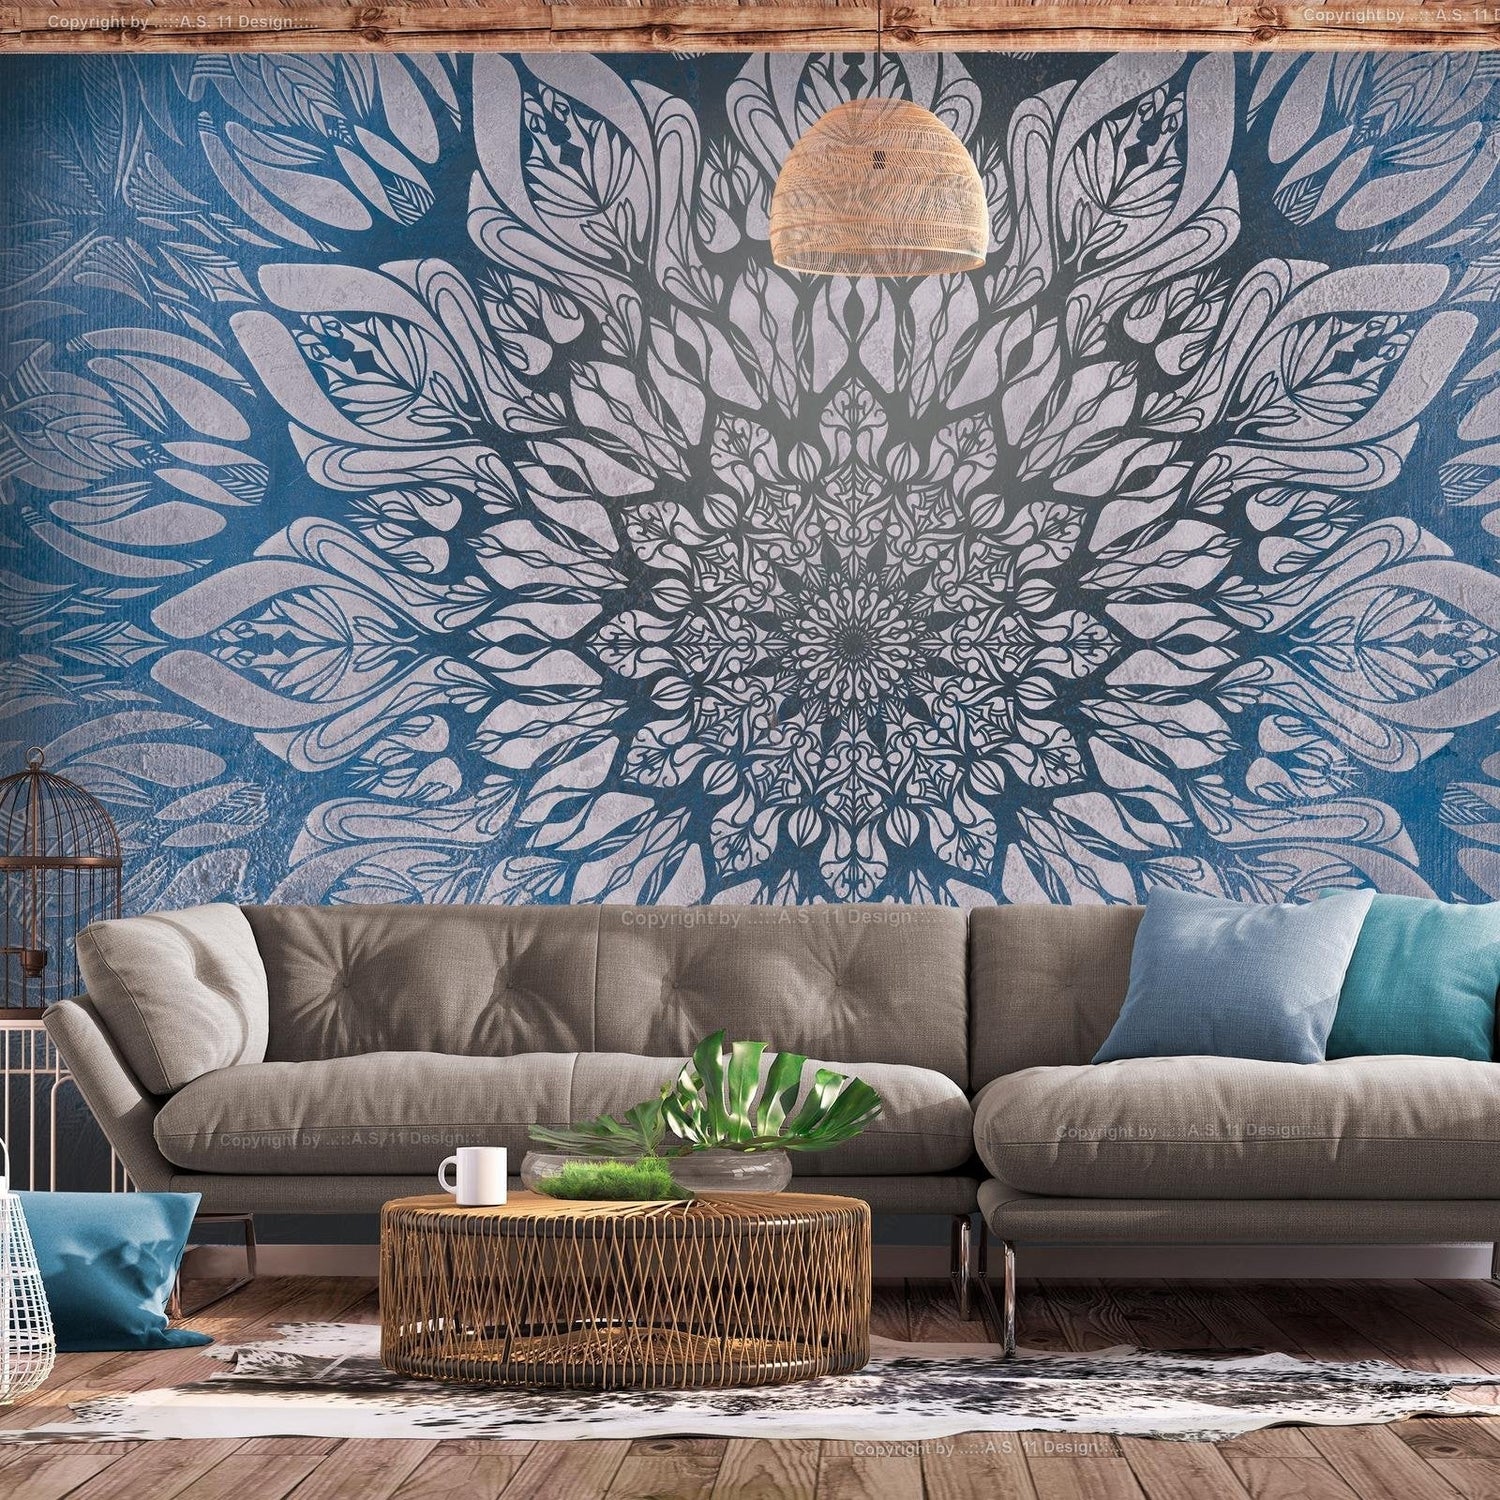 Peel and stick wall mural - Spider Web (Blue)-TipTopHomeDecor